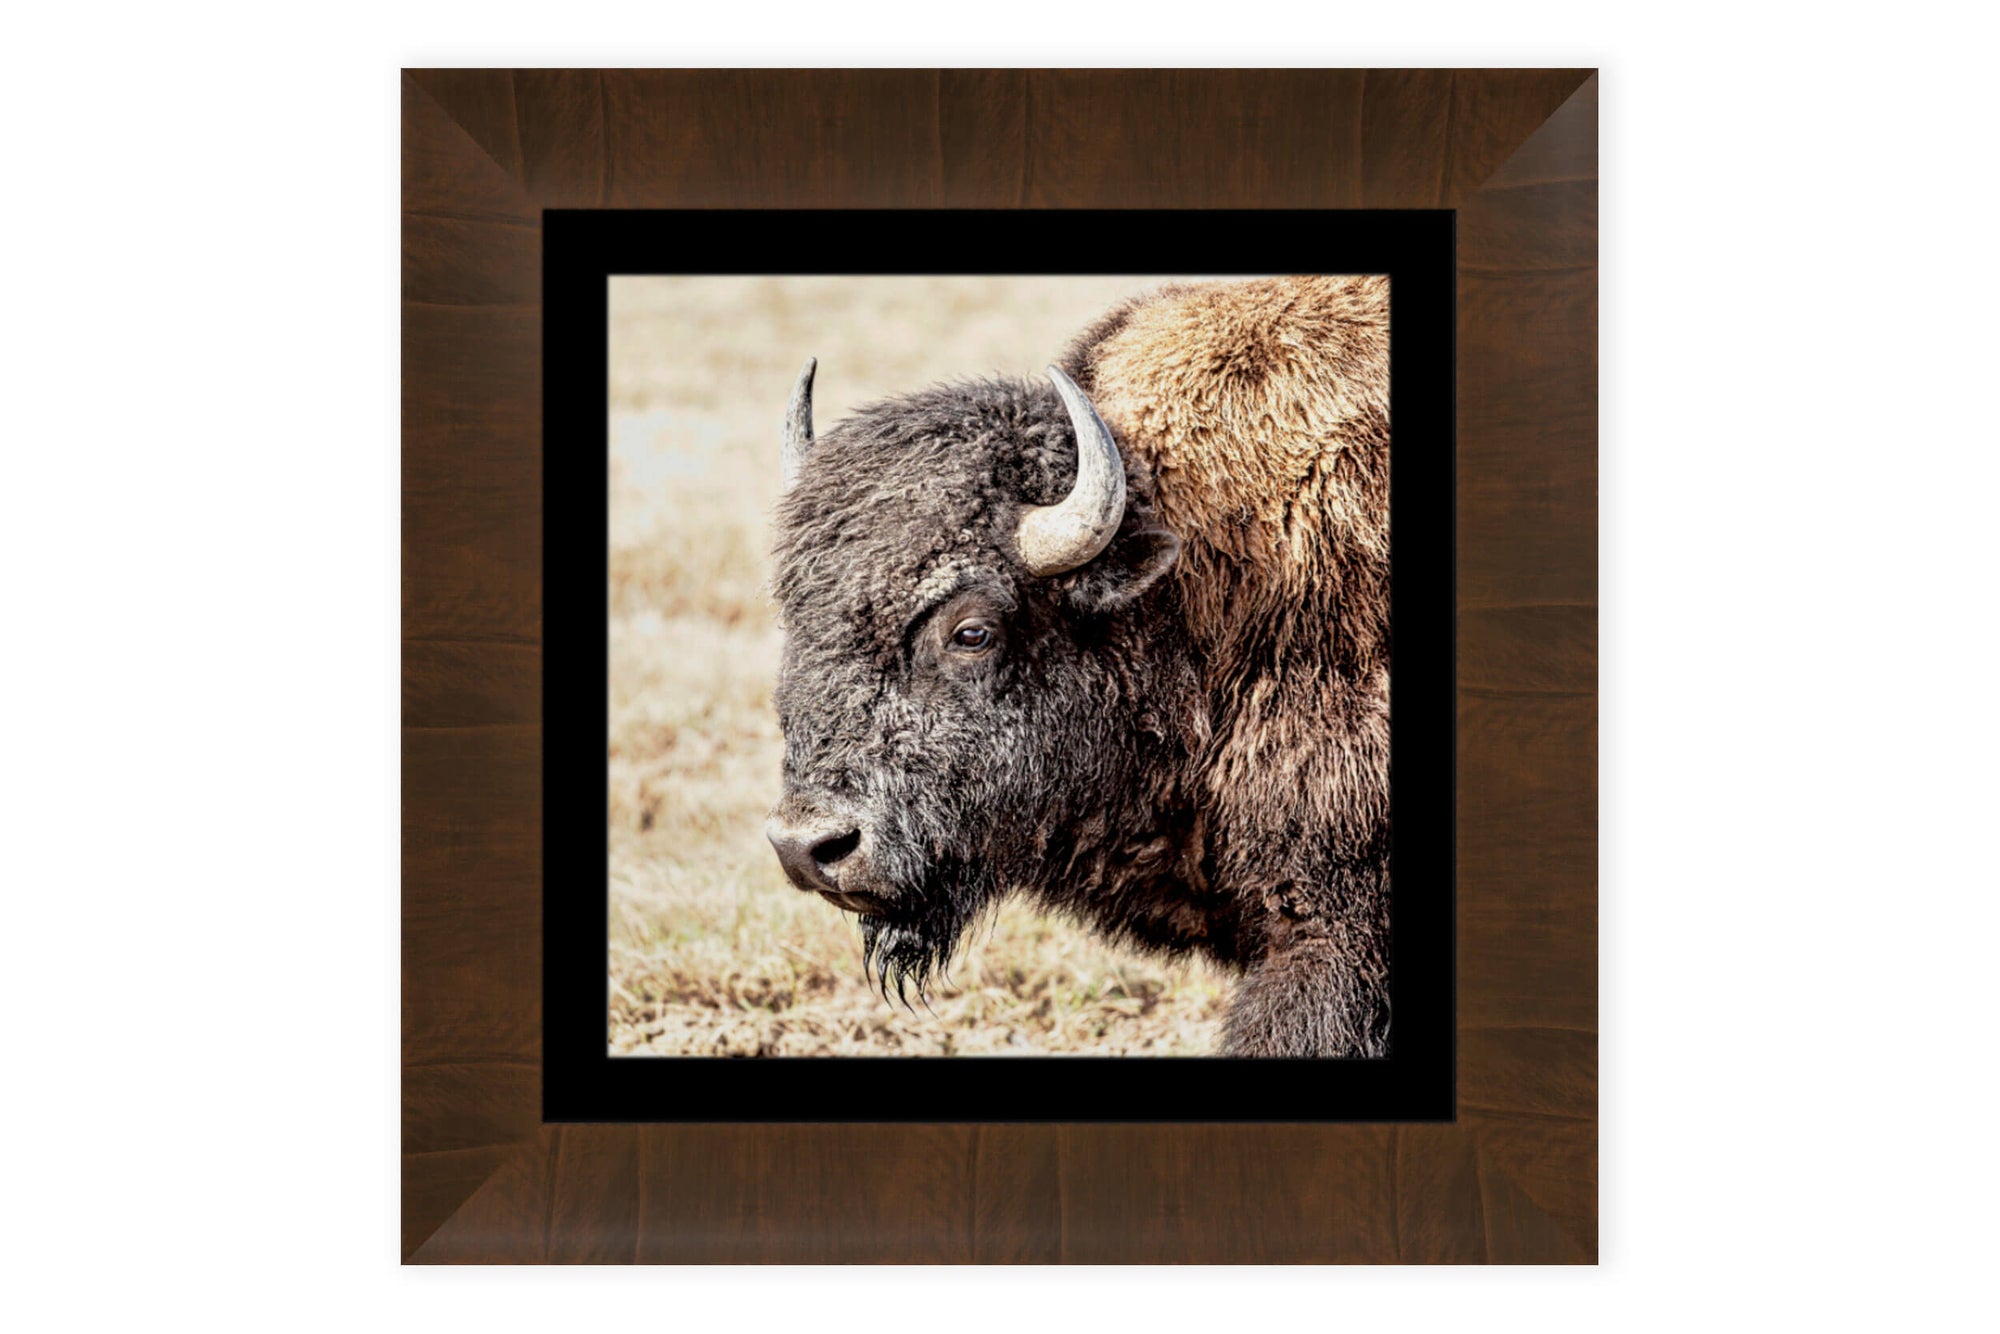 This is a piece of framed Yellowstone art showing a bison picture.